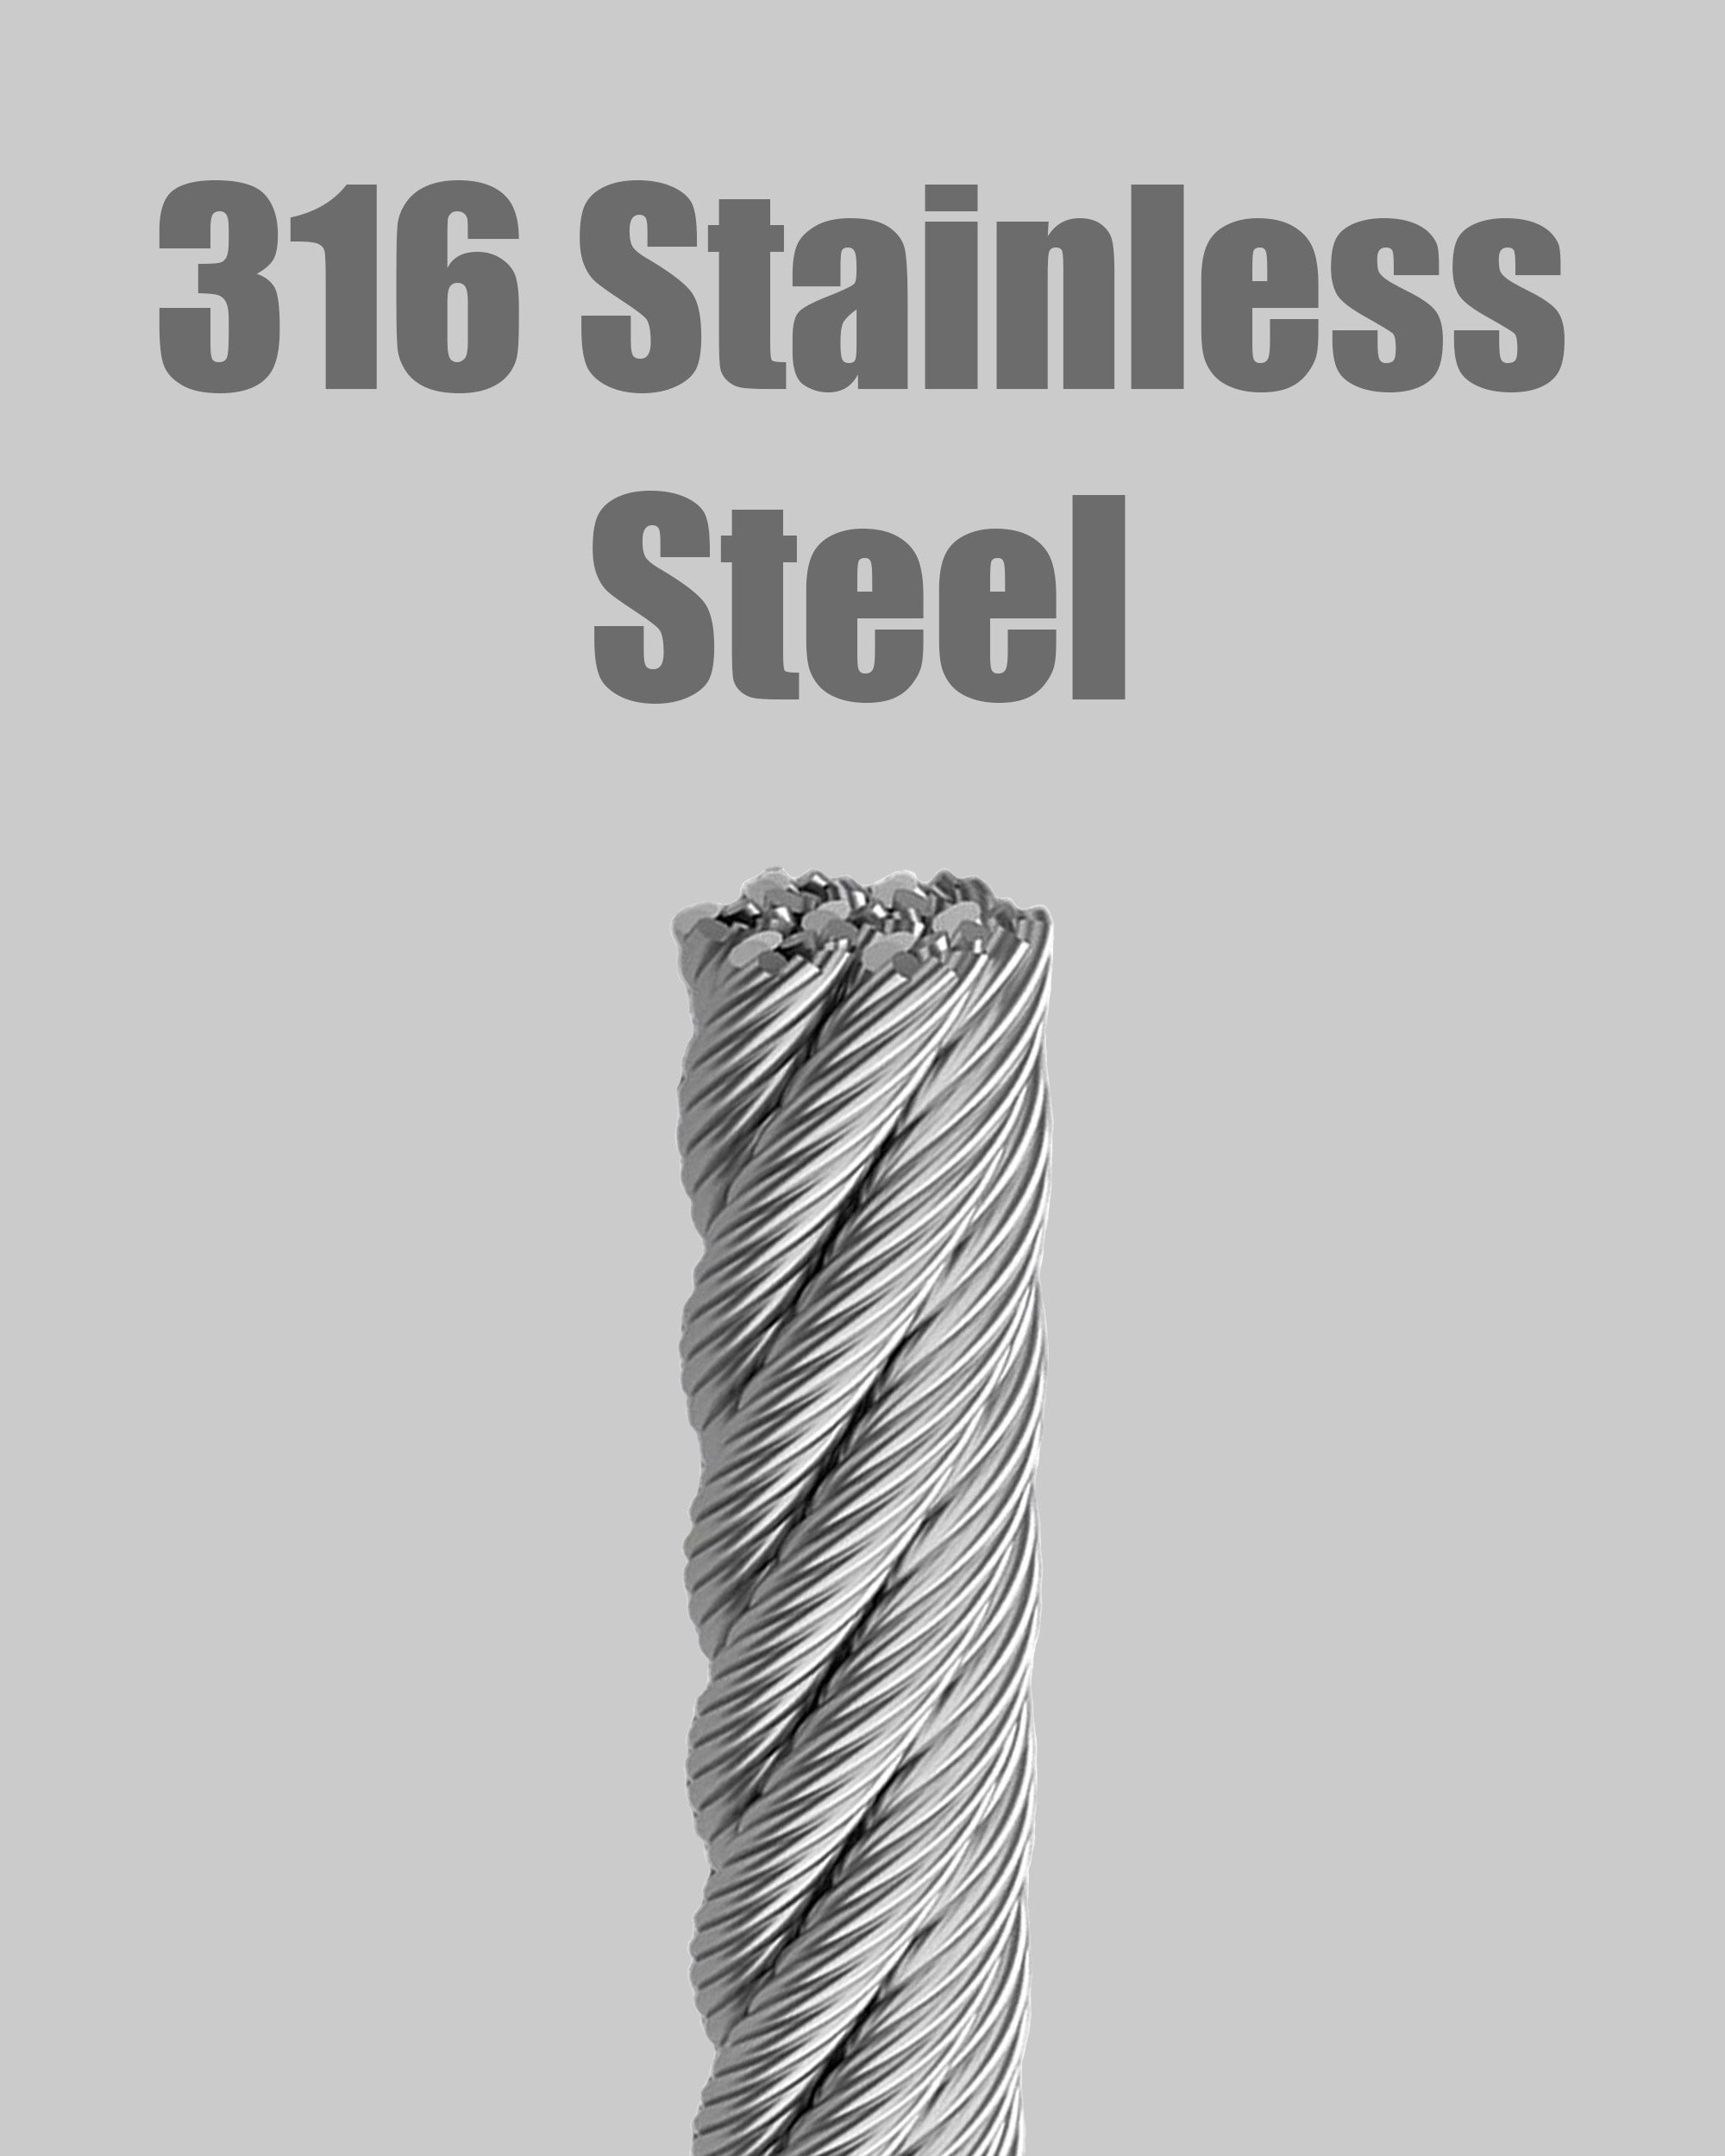 500FT 3/16" 7x7 Strands Construction Braided Stainless Wire Premium 316 Stainless Steel Deck Cable Railing for Outdoor, DIY Metal Wire Railing, Balustrades Projects